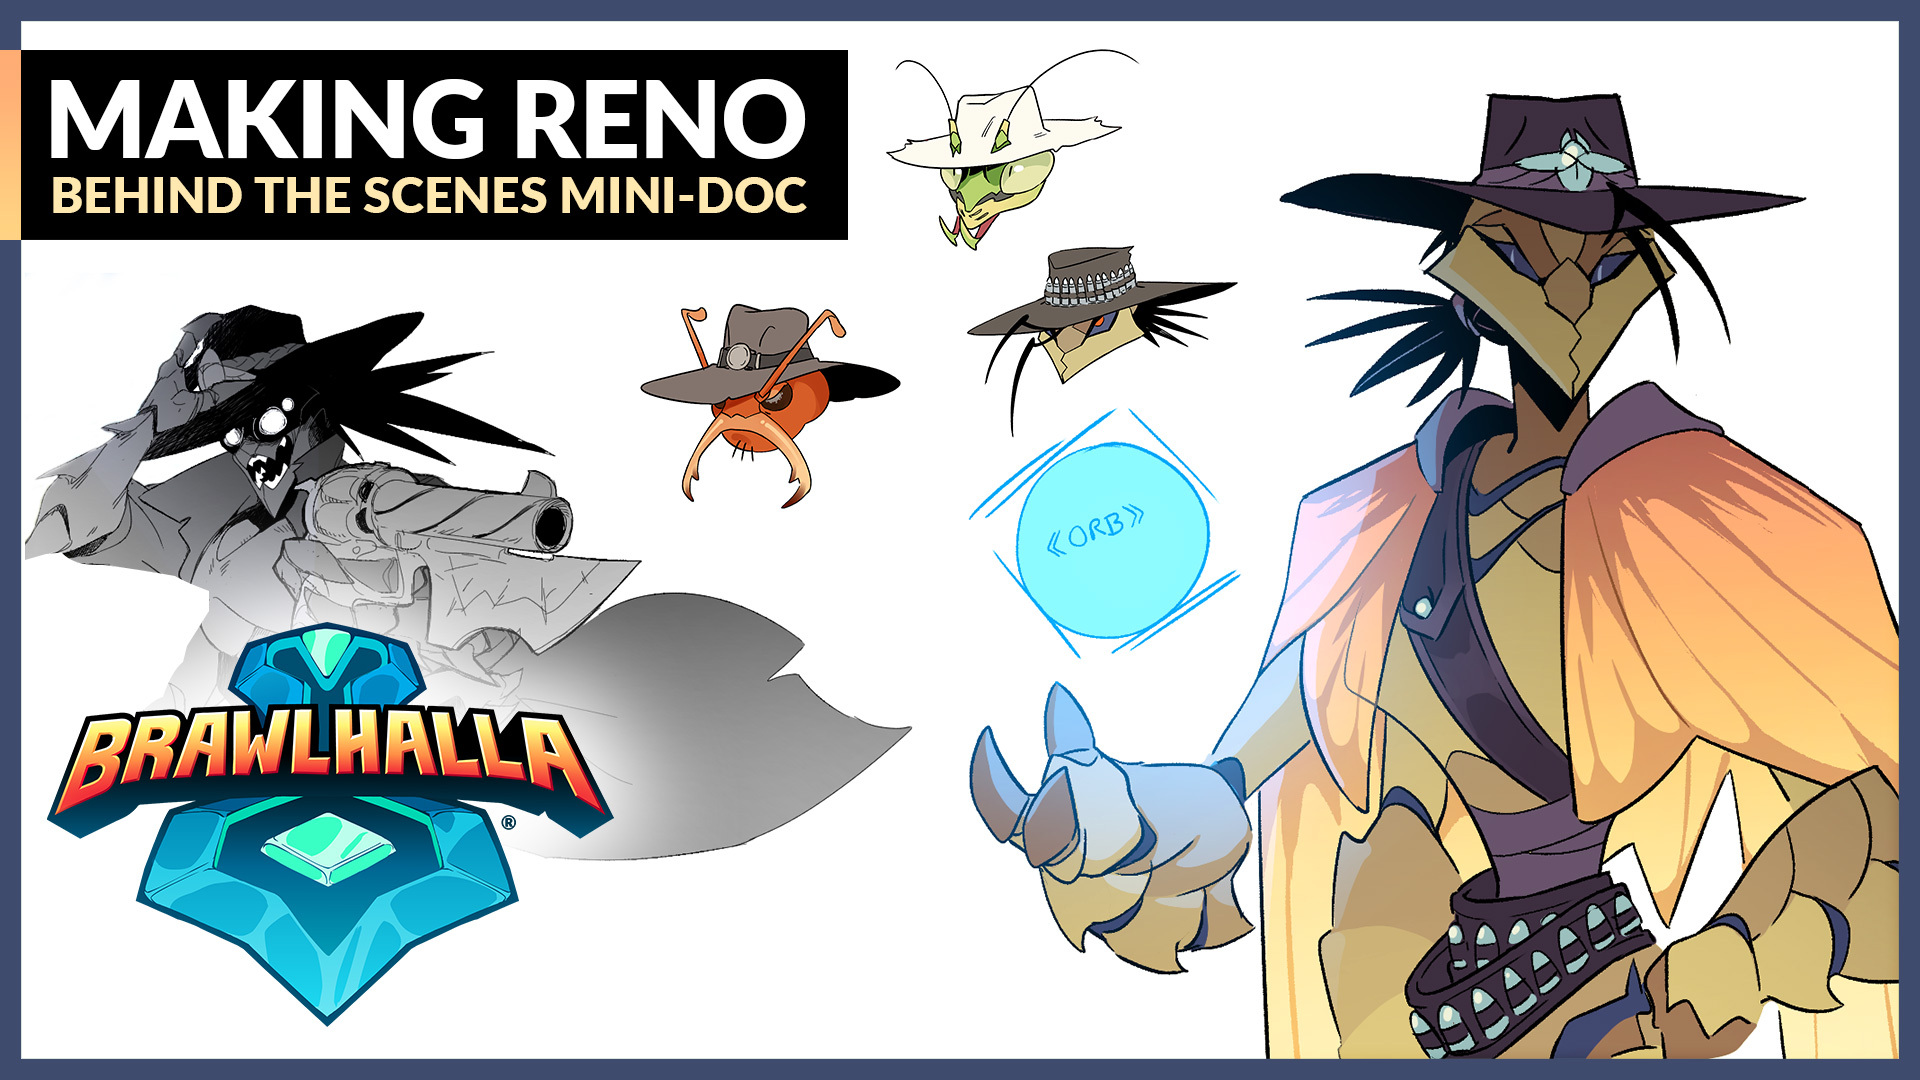 Behind the scenes of making Reno, the Bounty Hunter